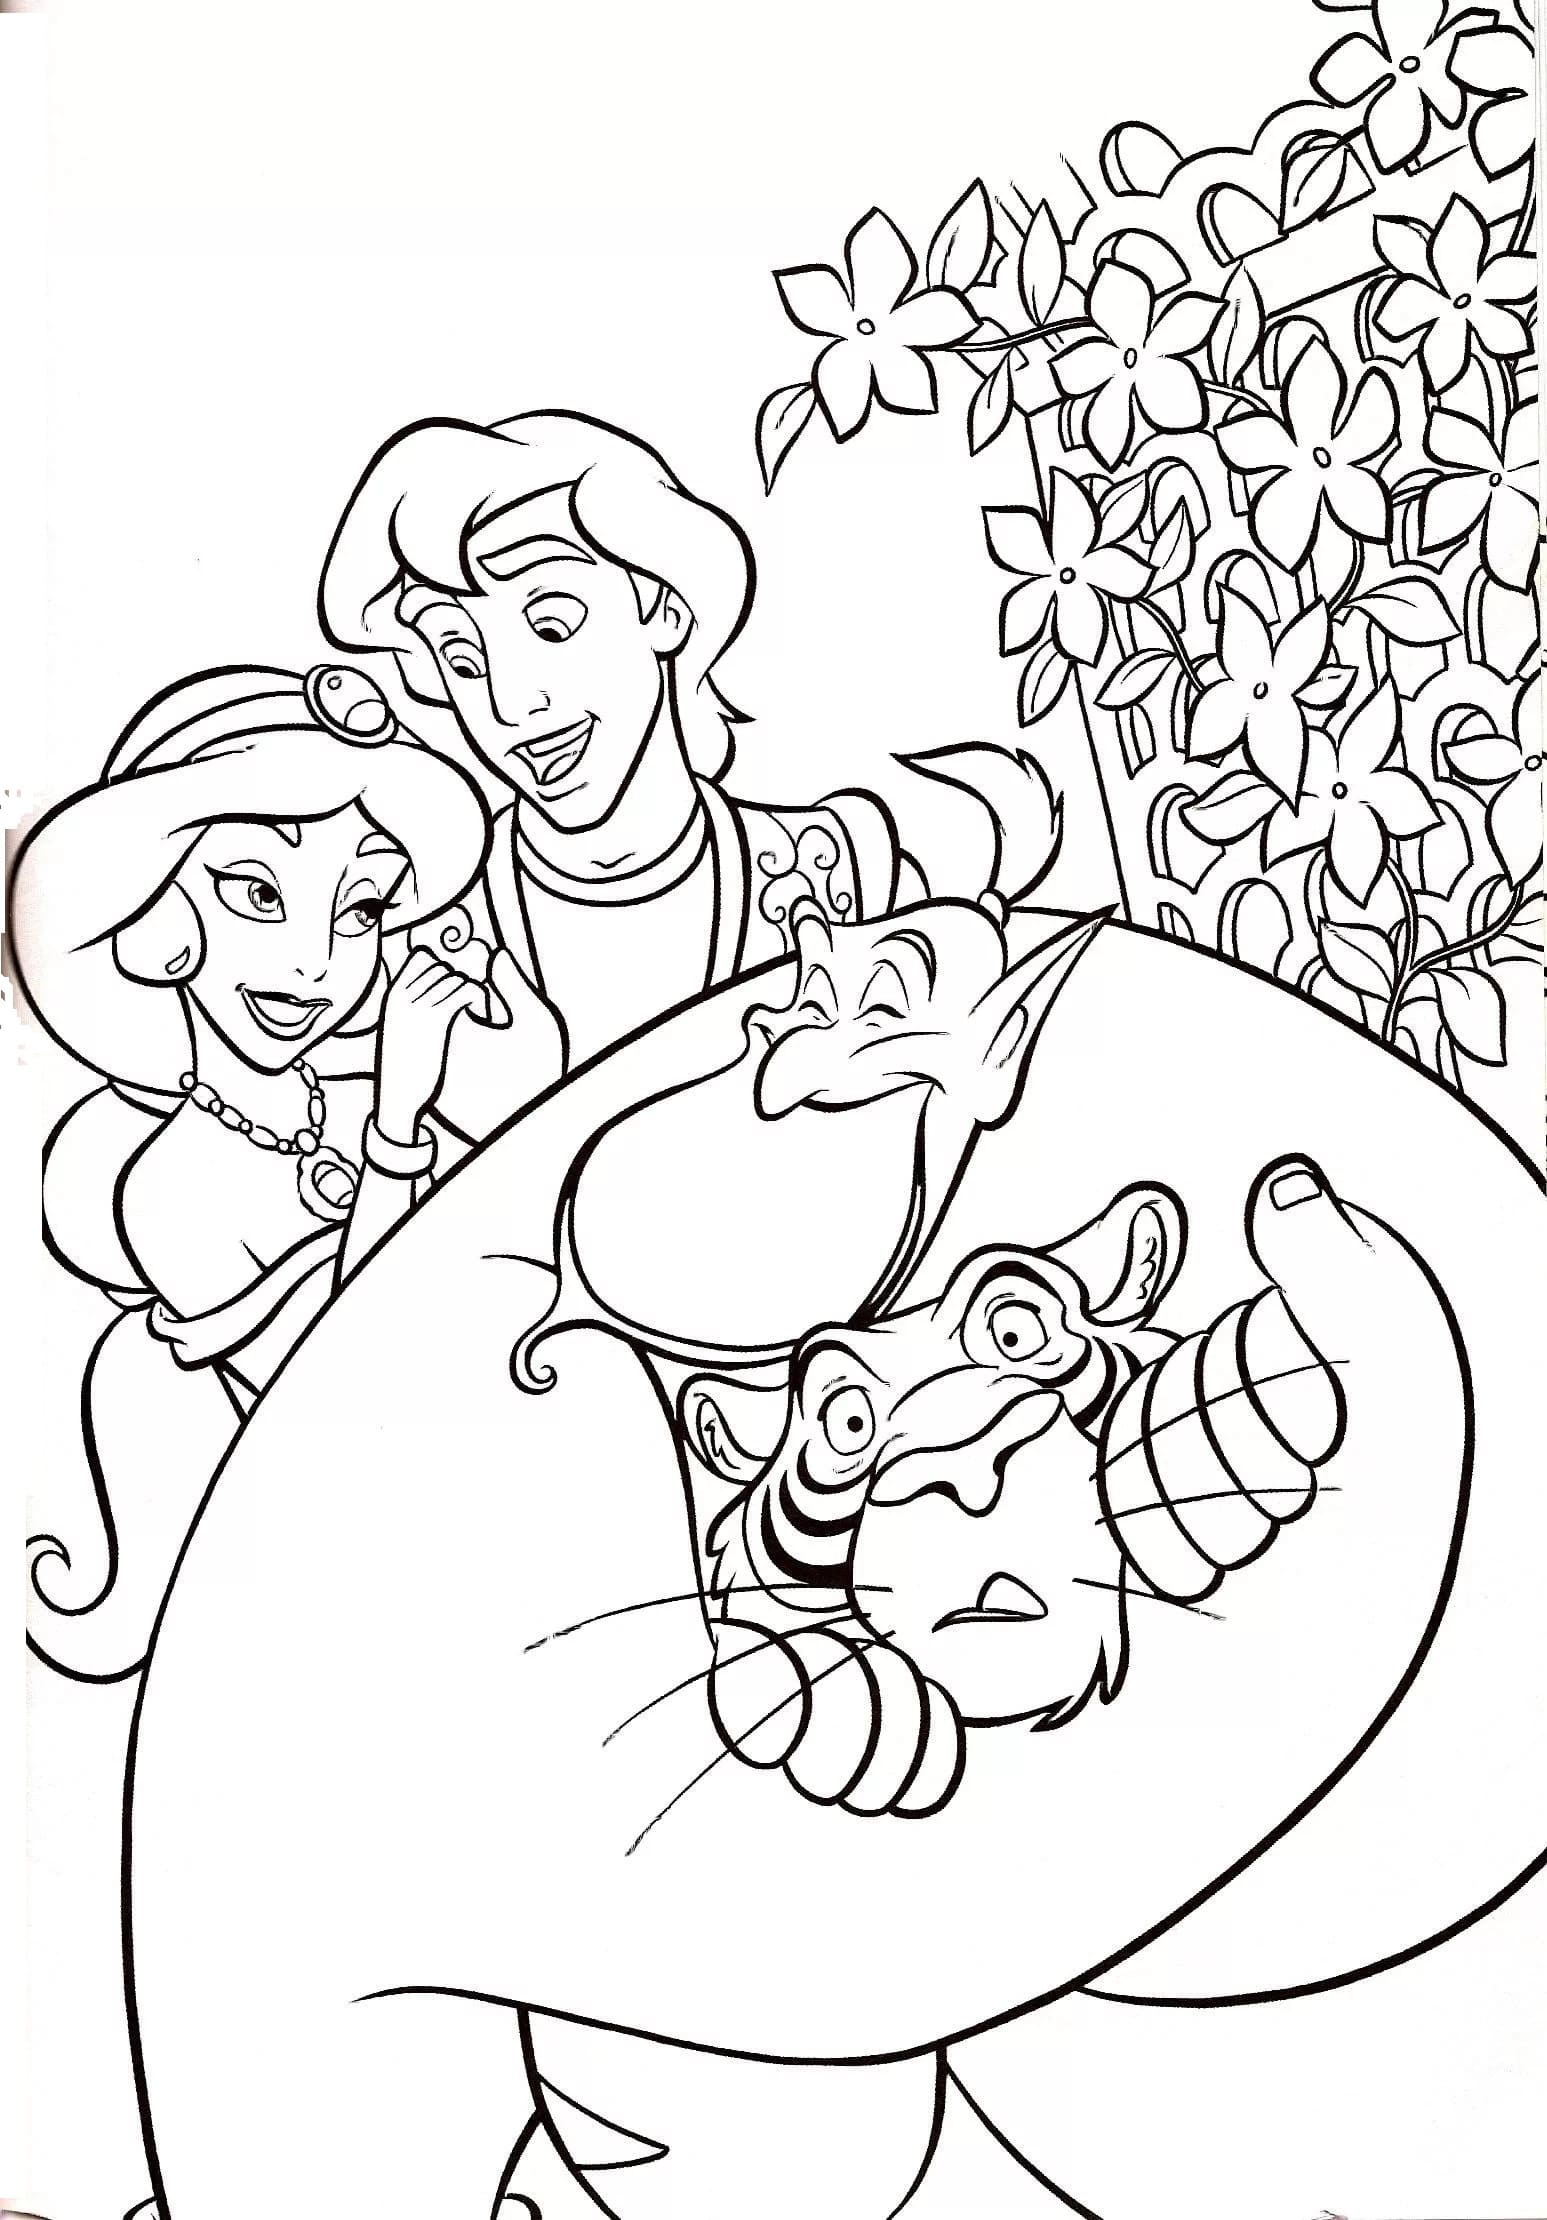 Disney Coloring Pages Aladdin Best Coloring Pages